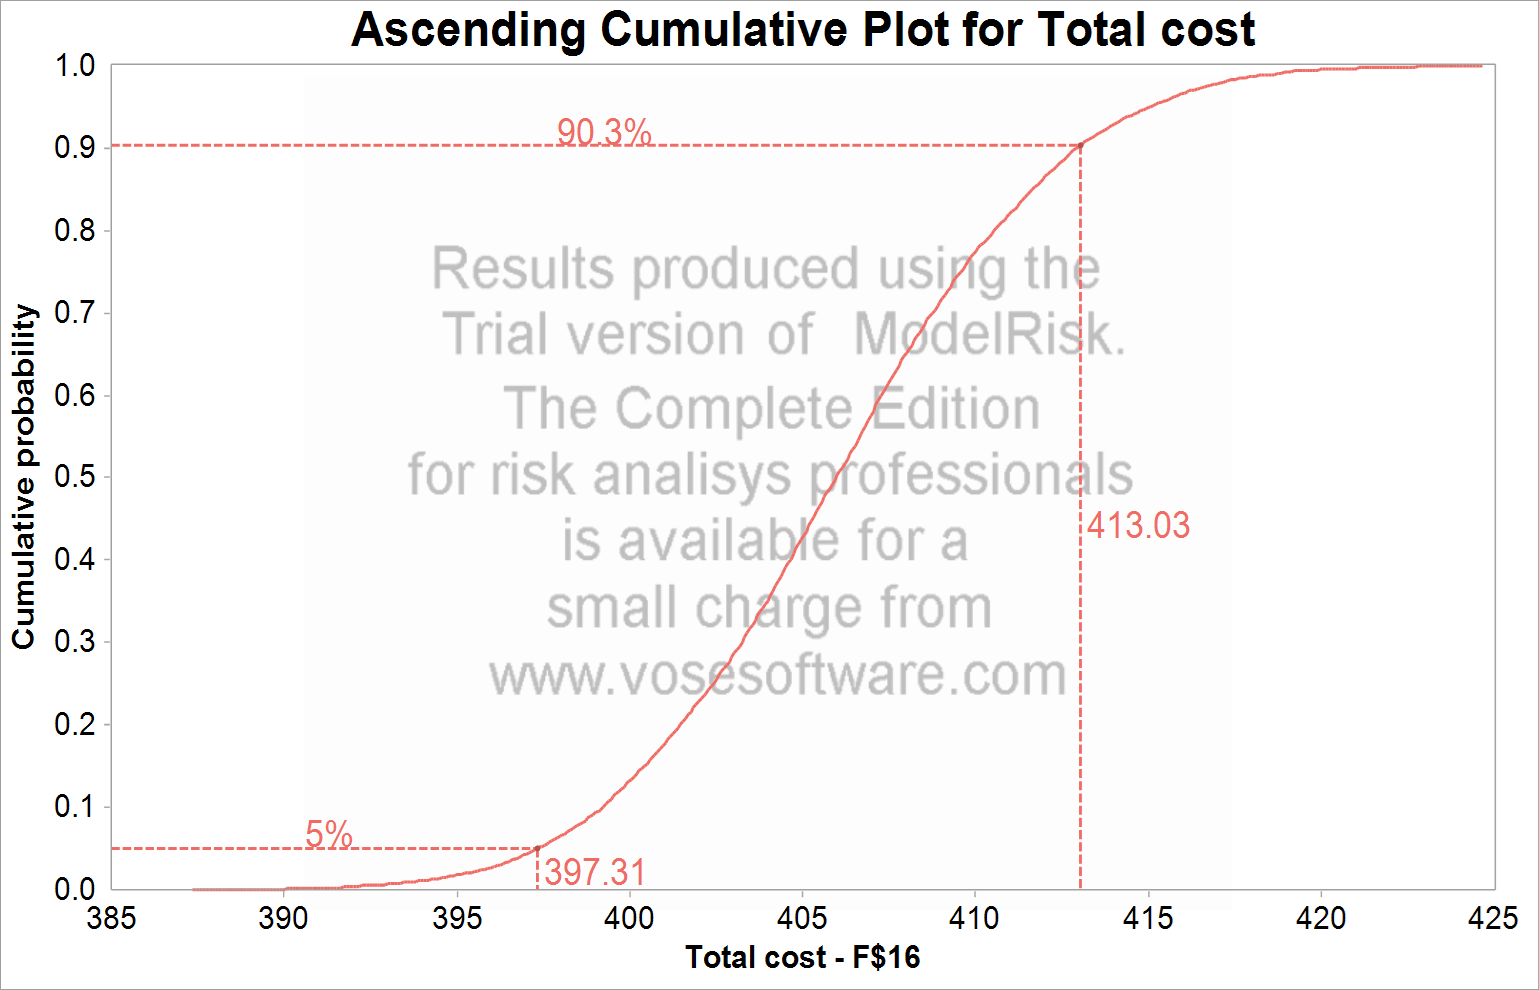 The graph created in the basic version of ModelRisk